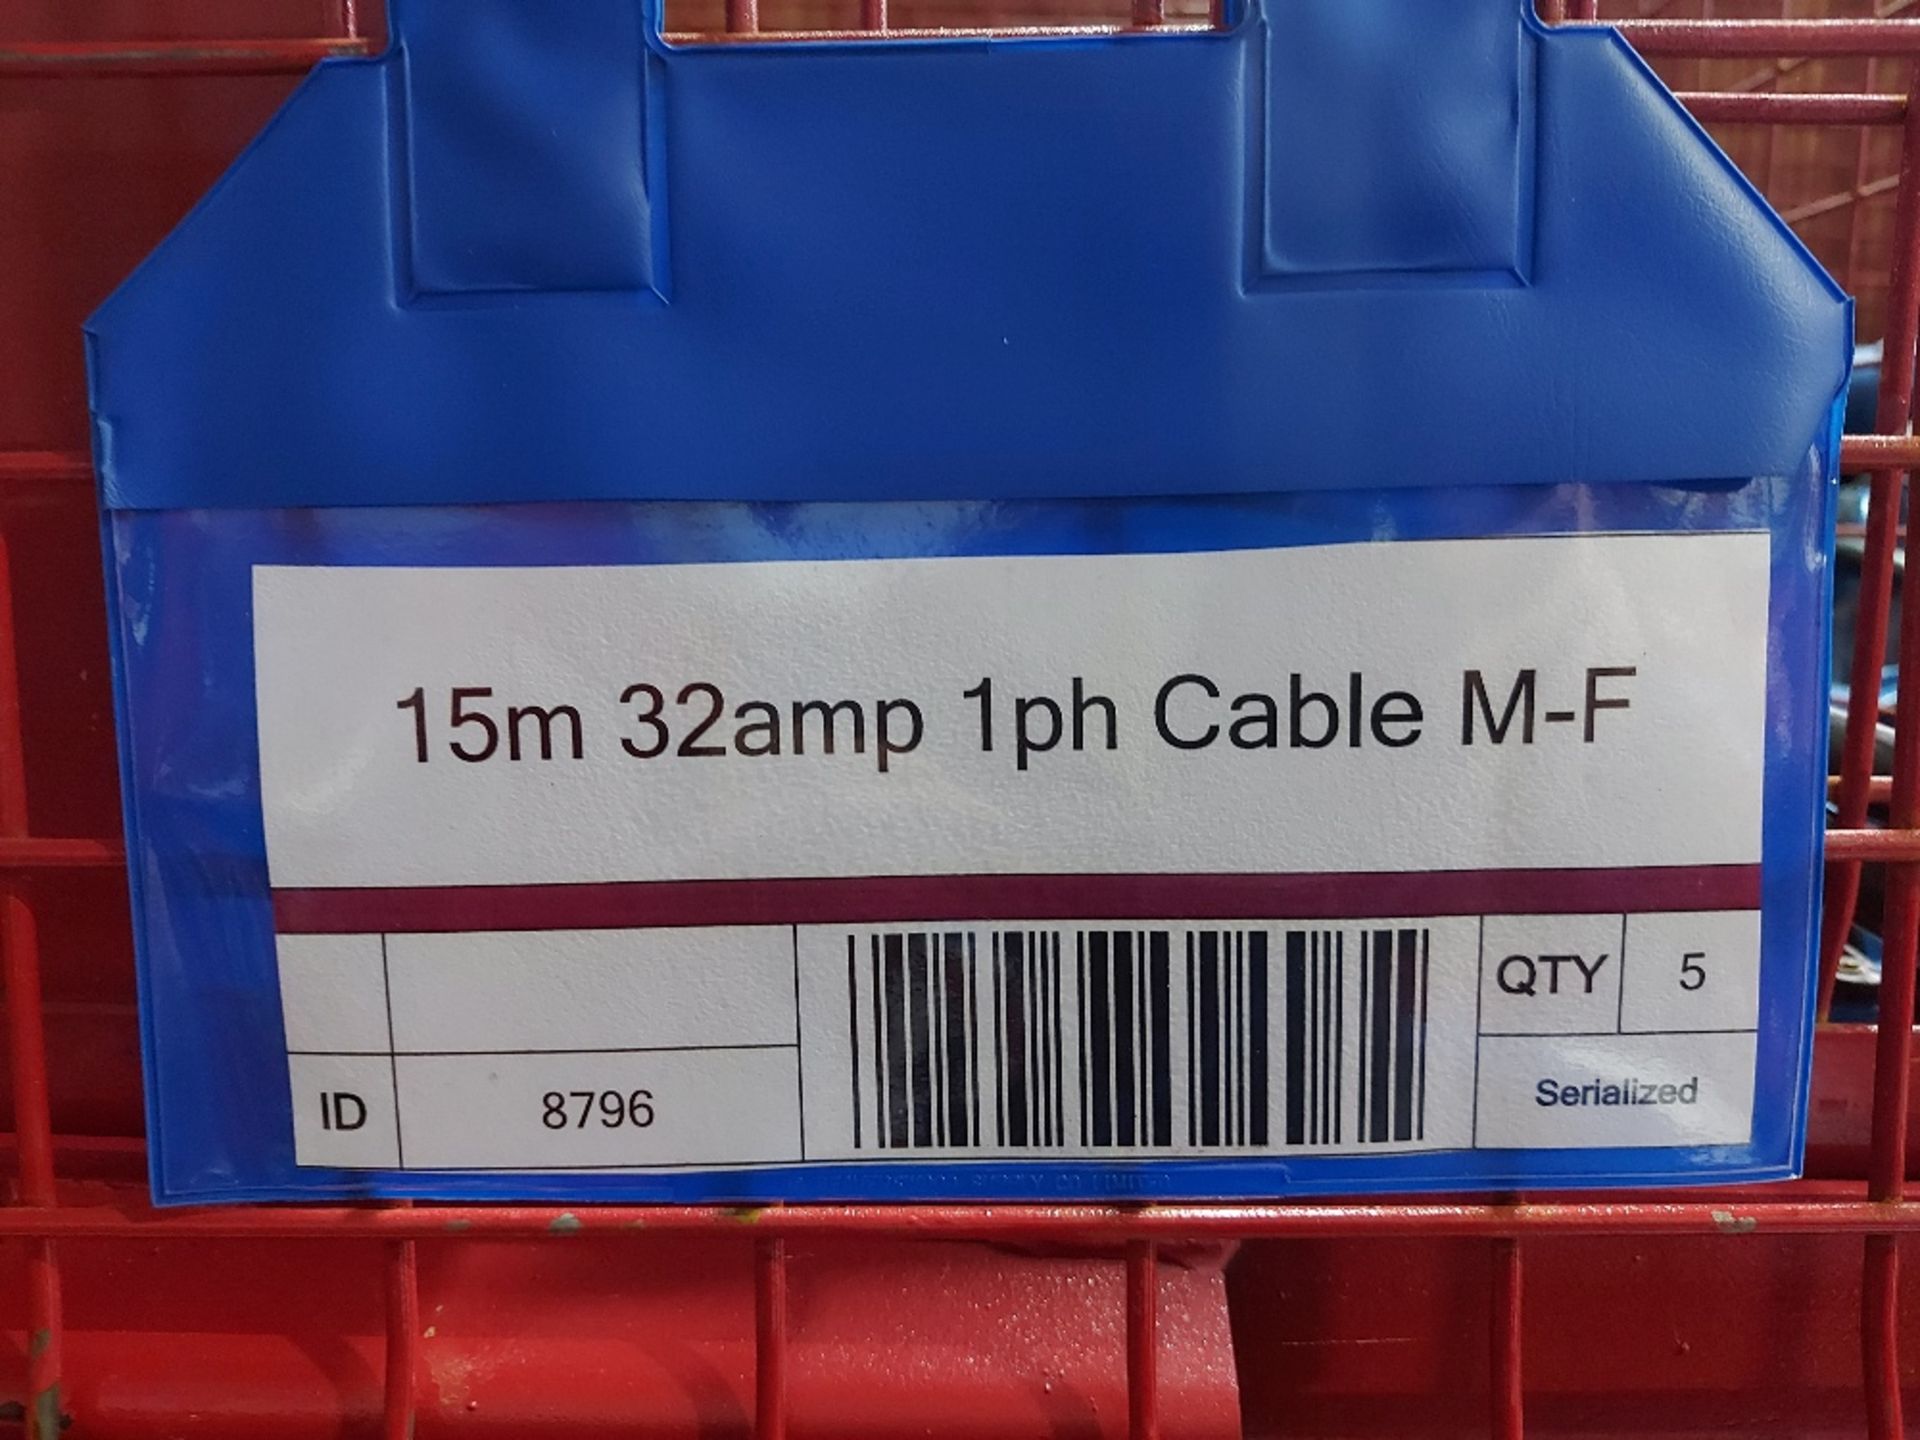 Large Quantity of 15m 32amp 1ph Cable M-F & 2m 32amp 1ph Cable M-F Steel Fabricated Stillage - Image 5 of 5